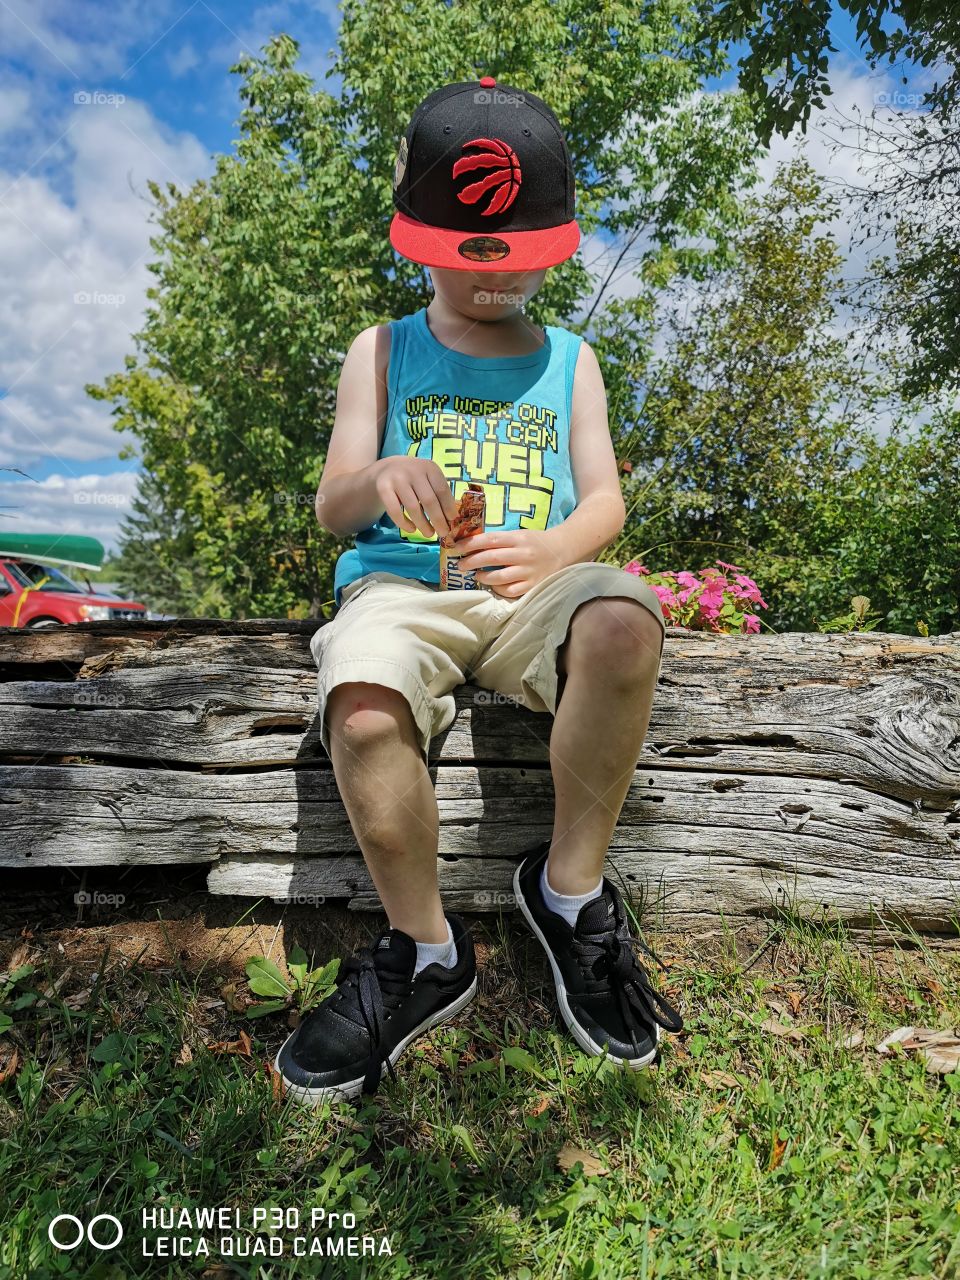 Young boy (my son) sitting on a log at a park, having a snack. Face covered by Raptors hat.